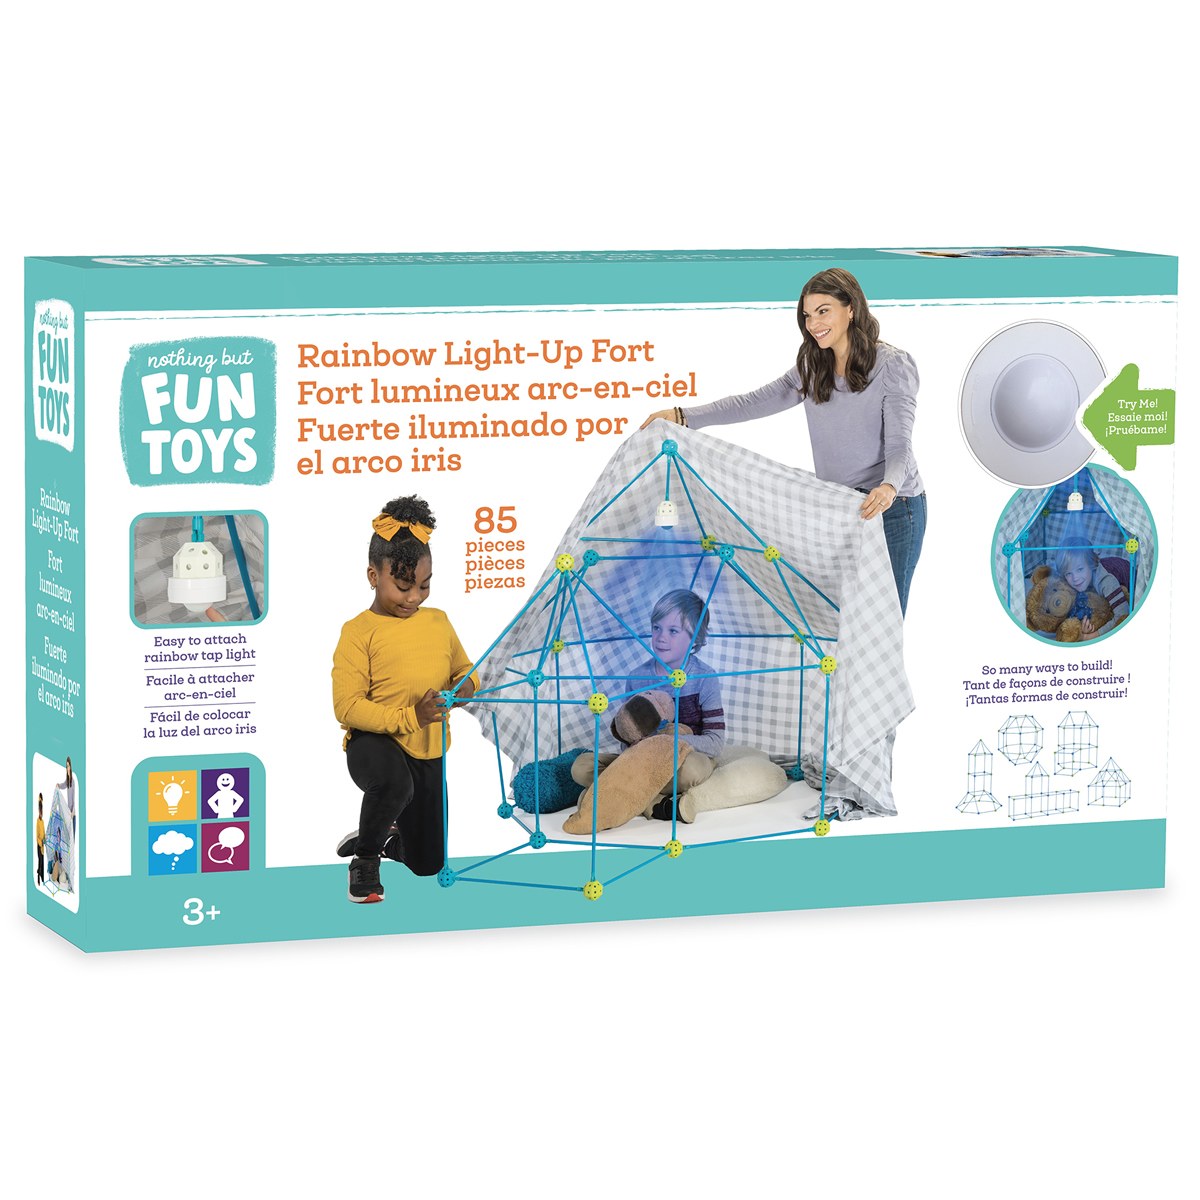 Nothing But Fun Toys Light Up Fort with LED Light